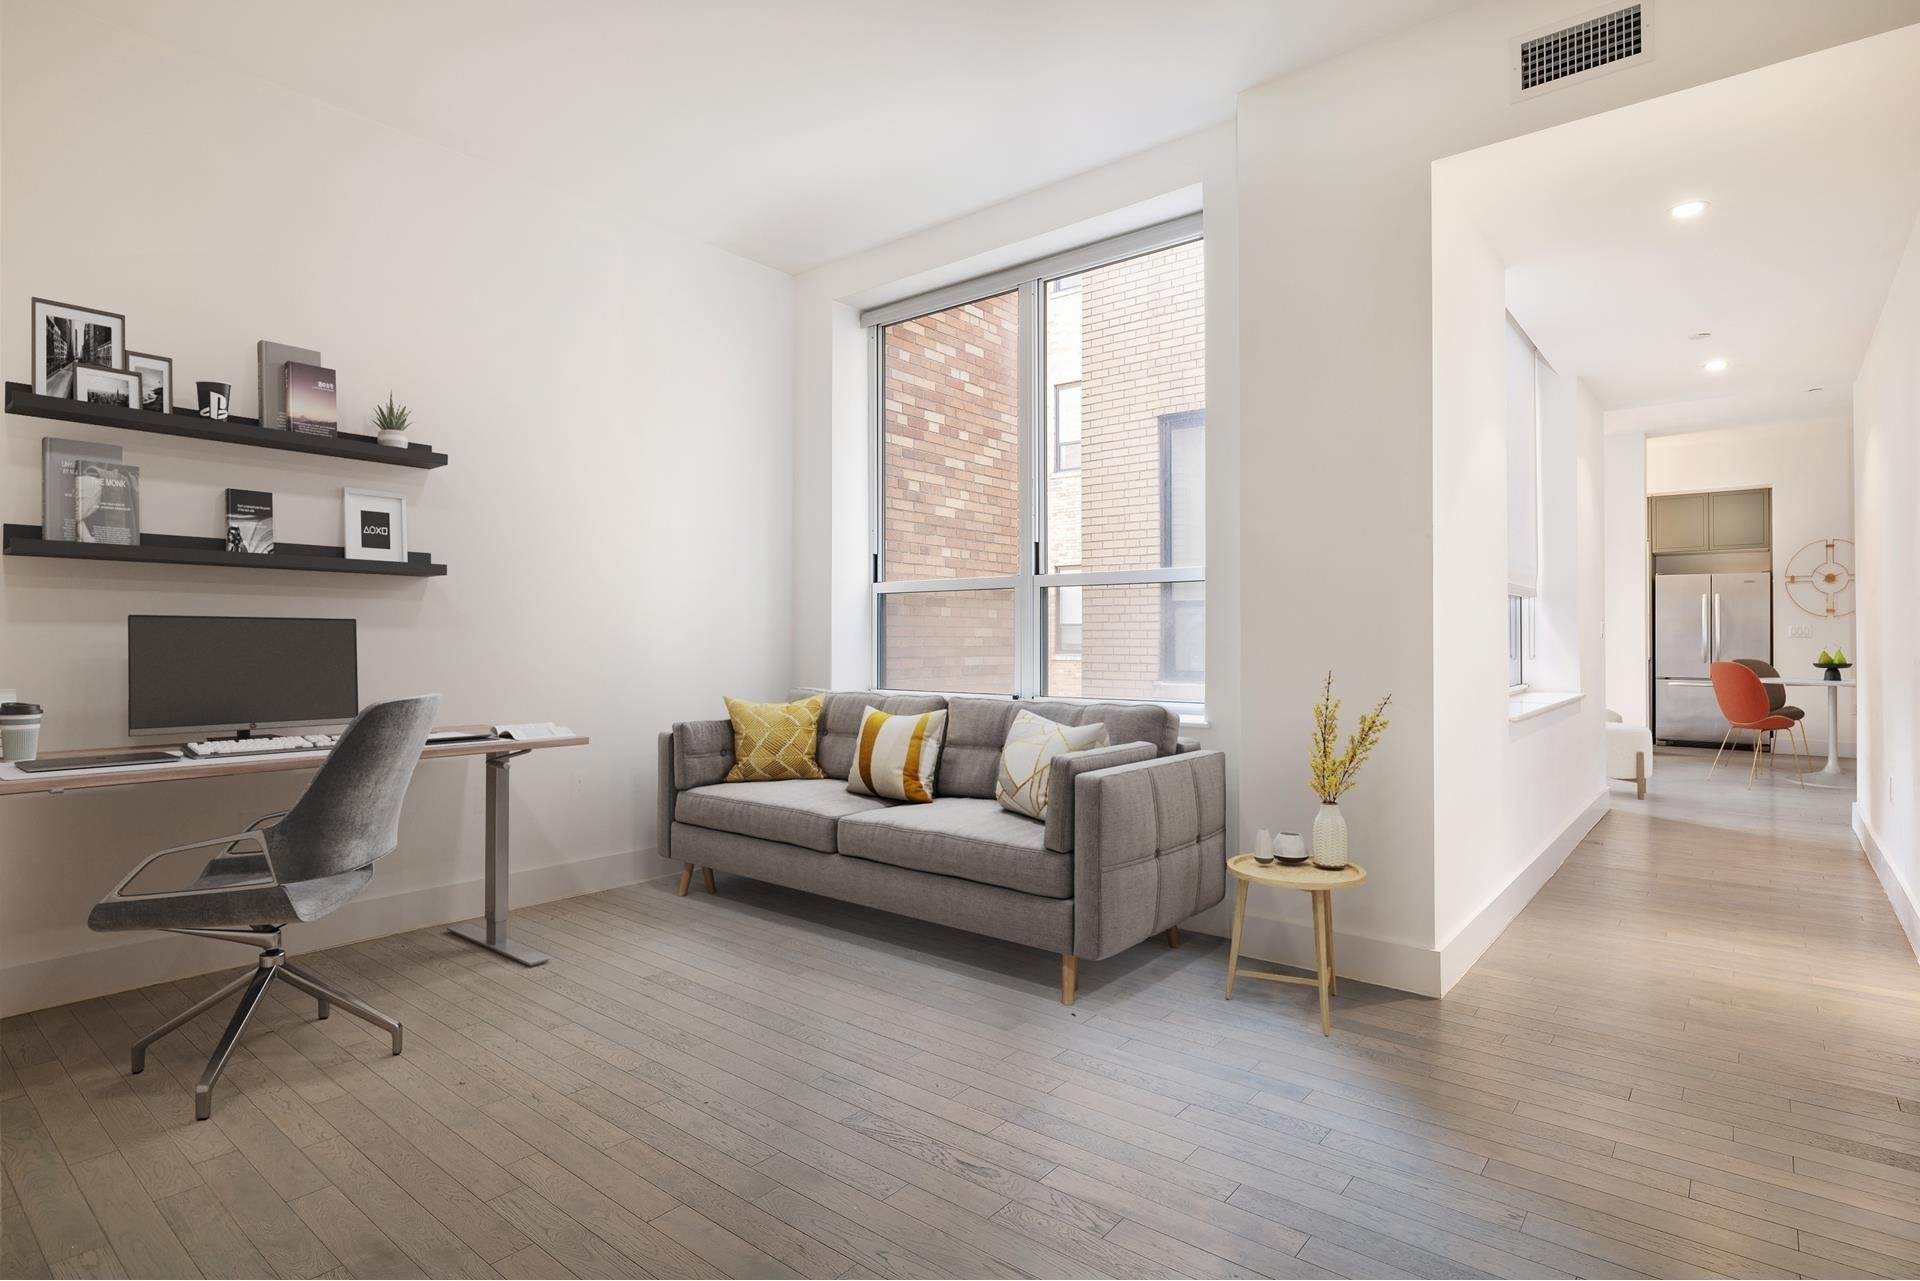 3. Condominiums for Sale at Nine52, 416 W 52ND ST, 406 Hell's Kitchen, New York, New York 10019